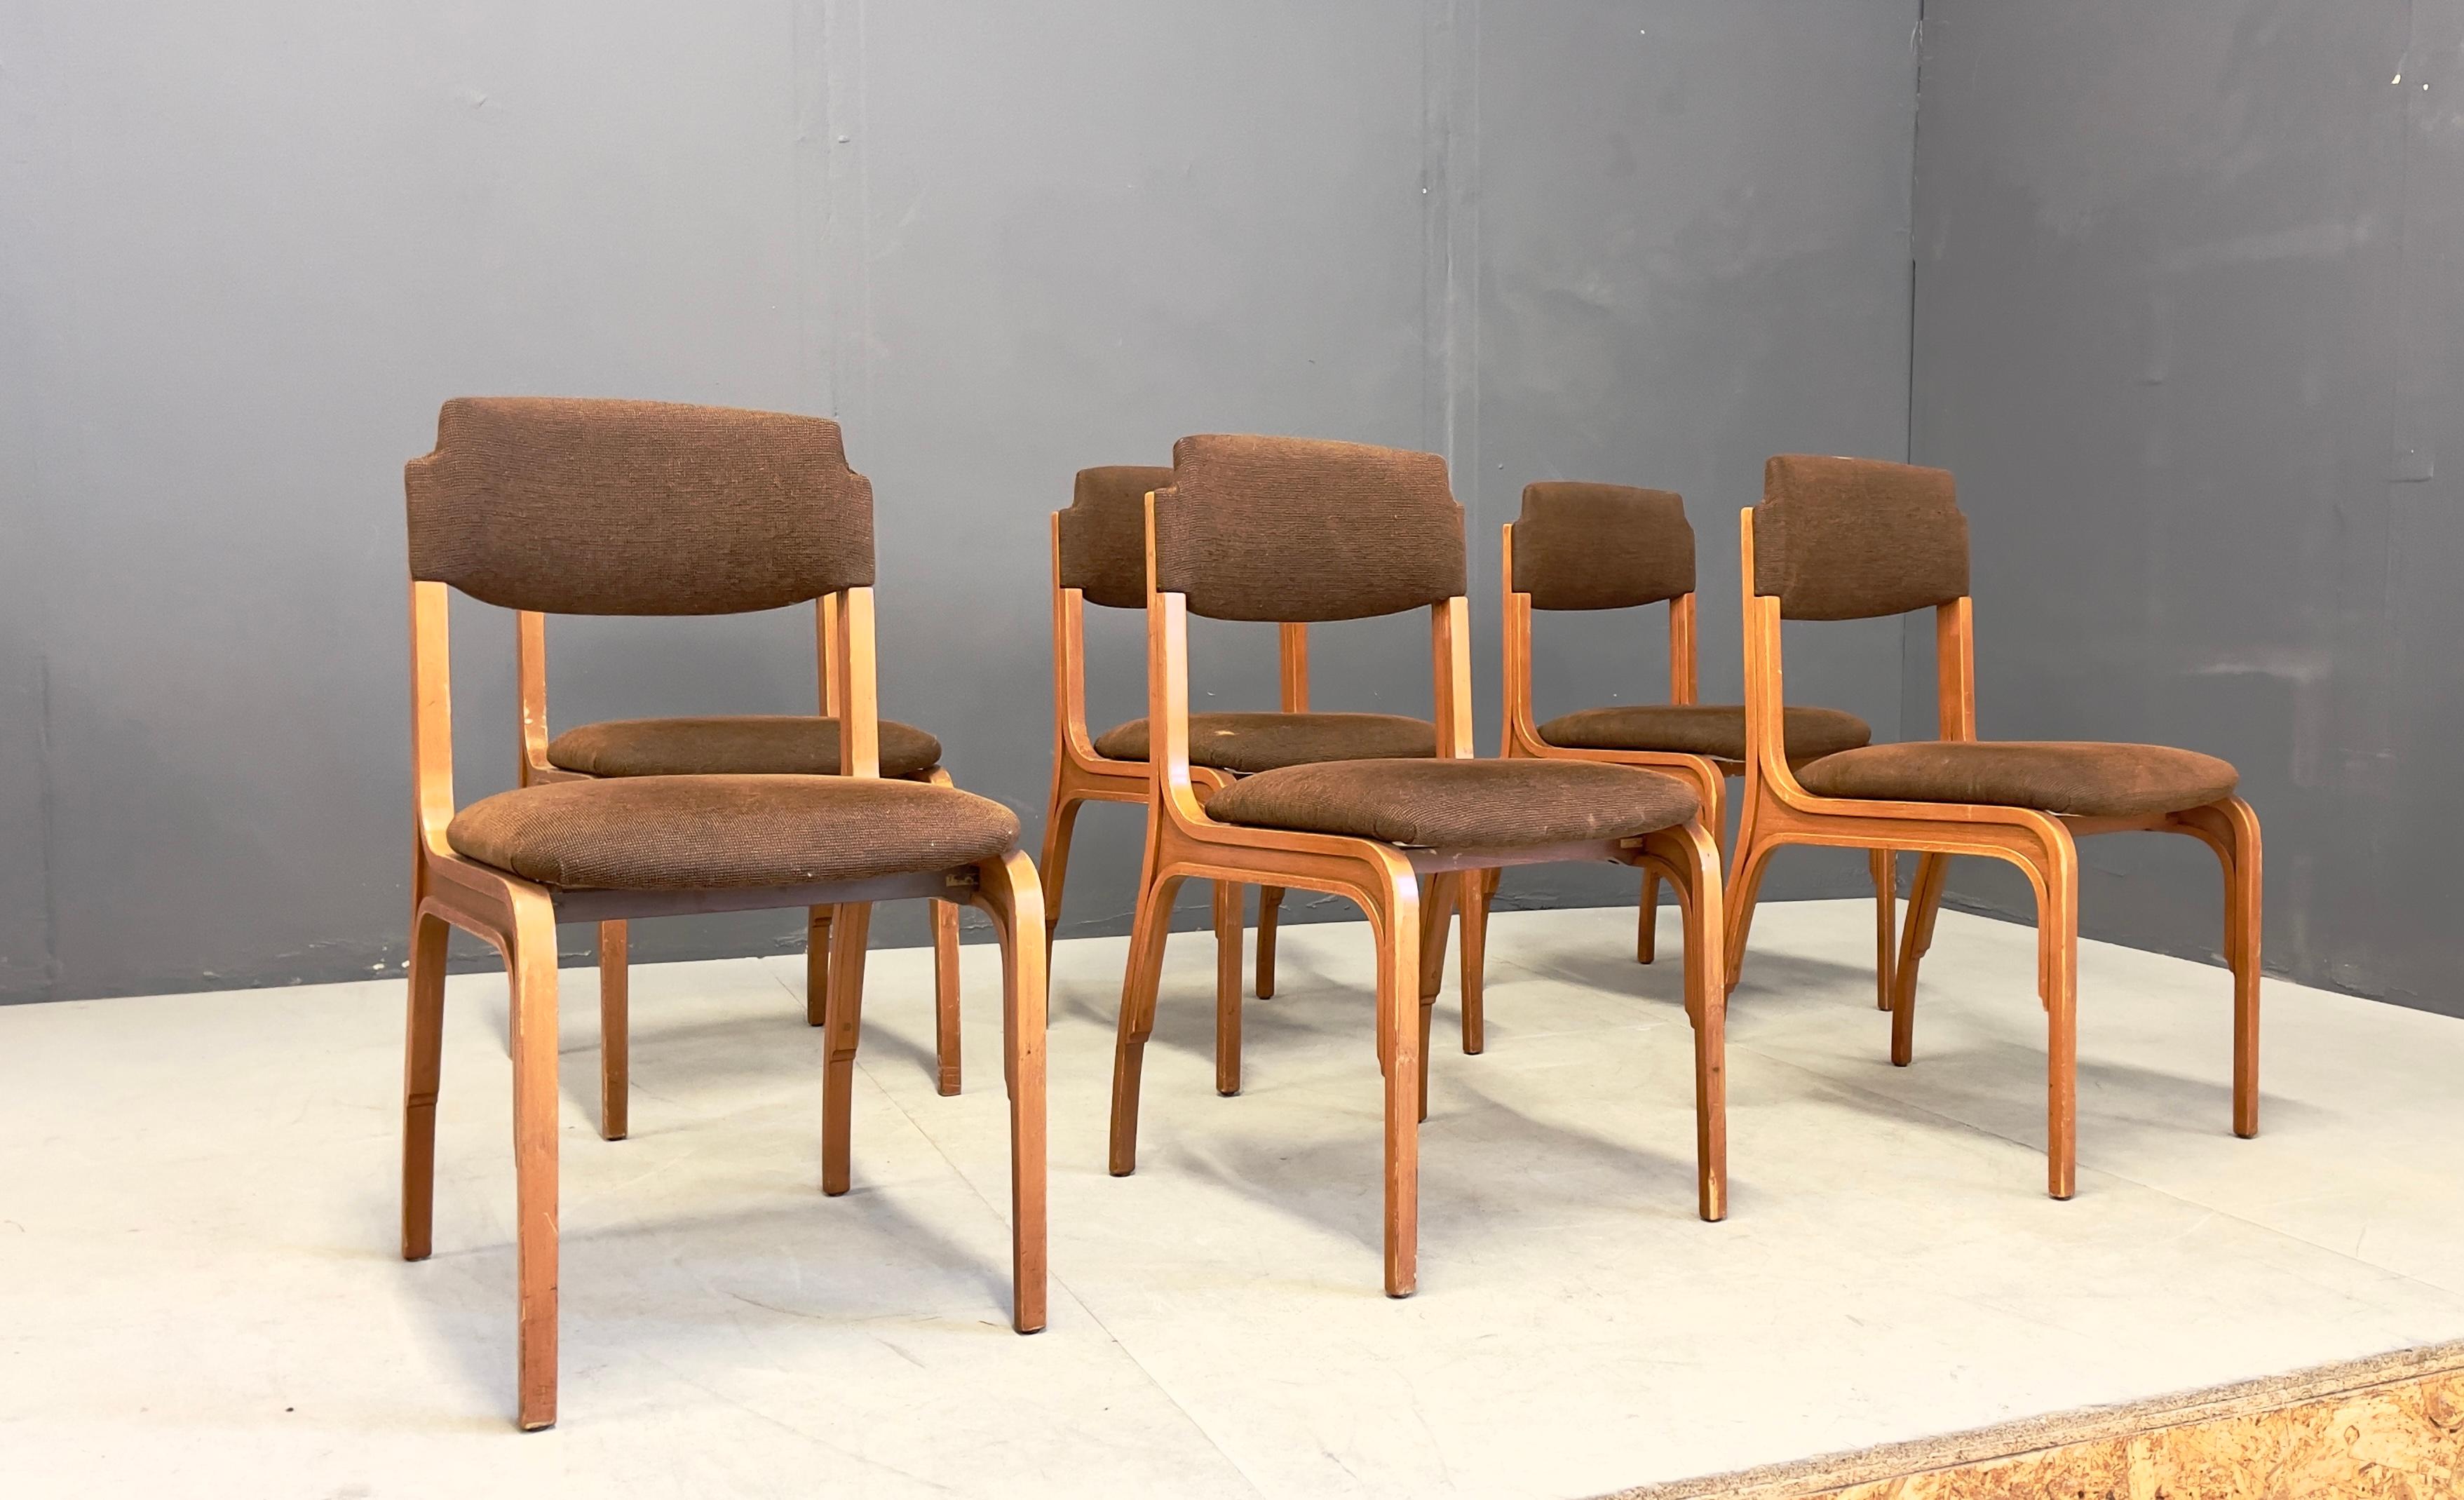 Six chairs with wooden frame, seat and back covered in fabric. Manufacturer CARUGATI YARDS. With manufacturer's label. 1960s.